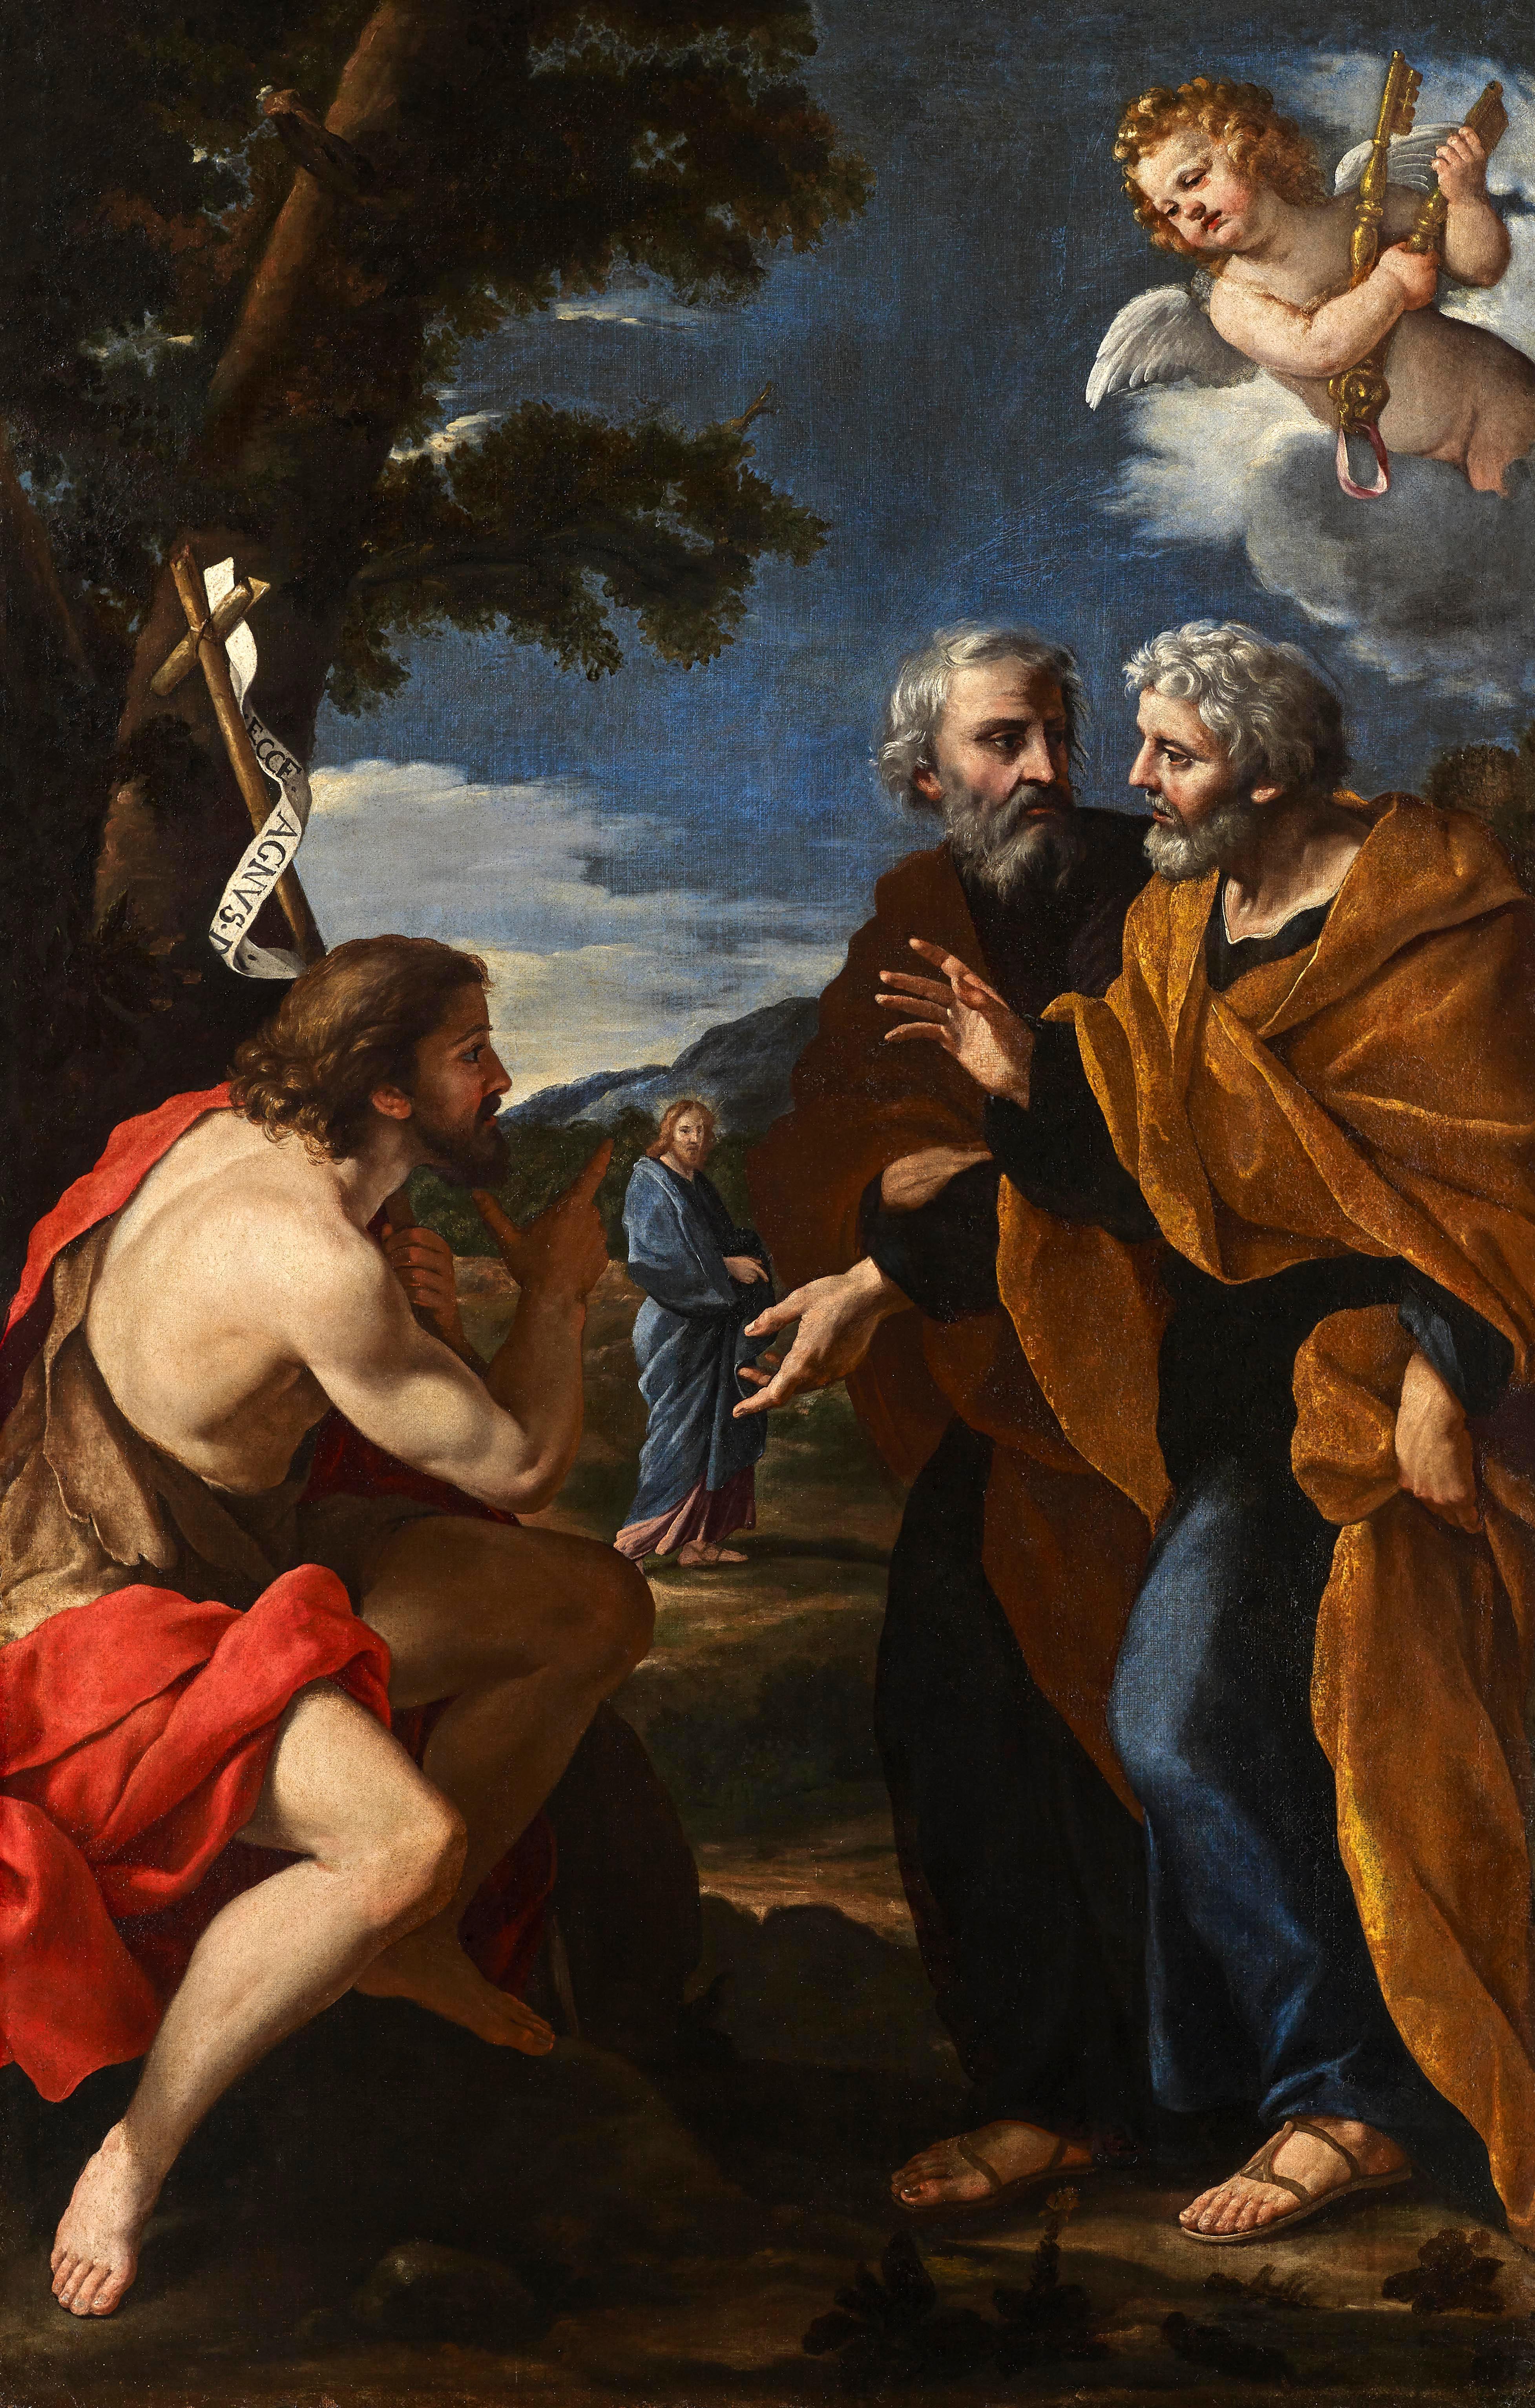 St. John the Baptist pointing out (revealing) Christ - Painting by Giovanni Francesco Romanelli